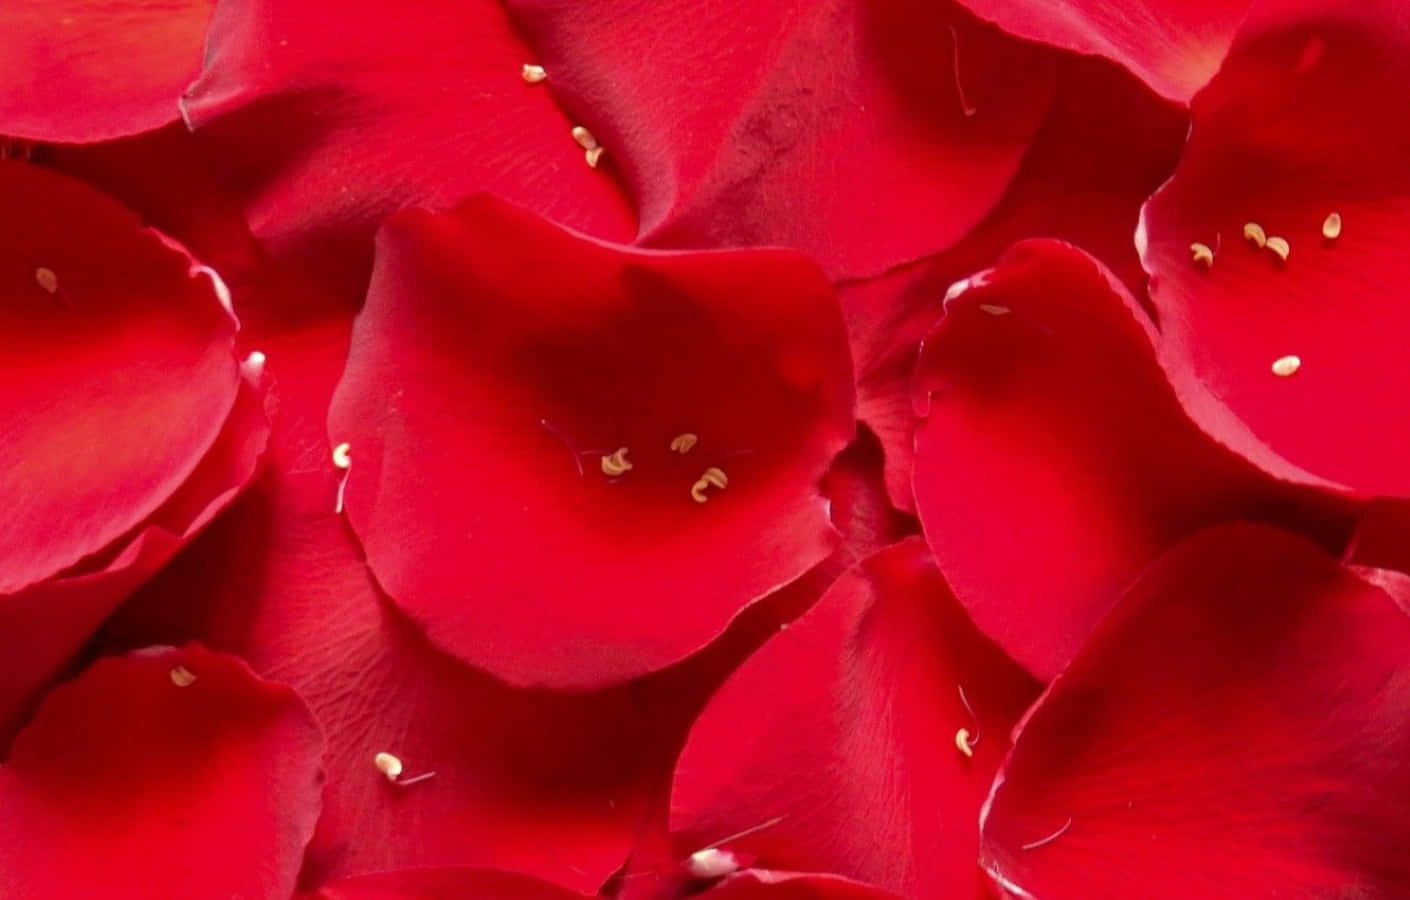 Blooming Red Rose Close-Up Wallpaper